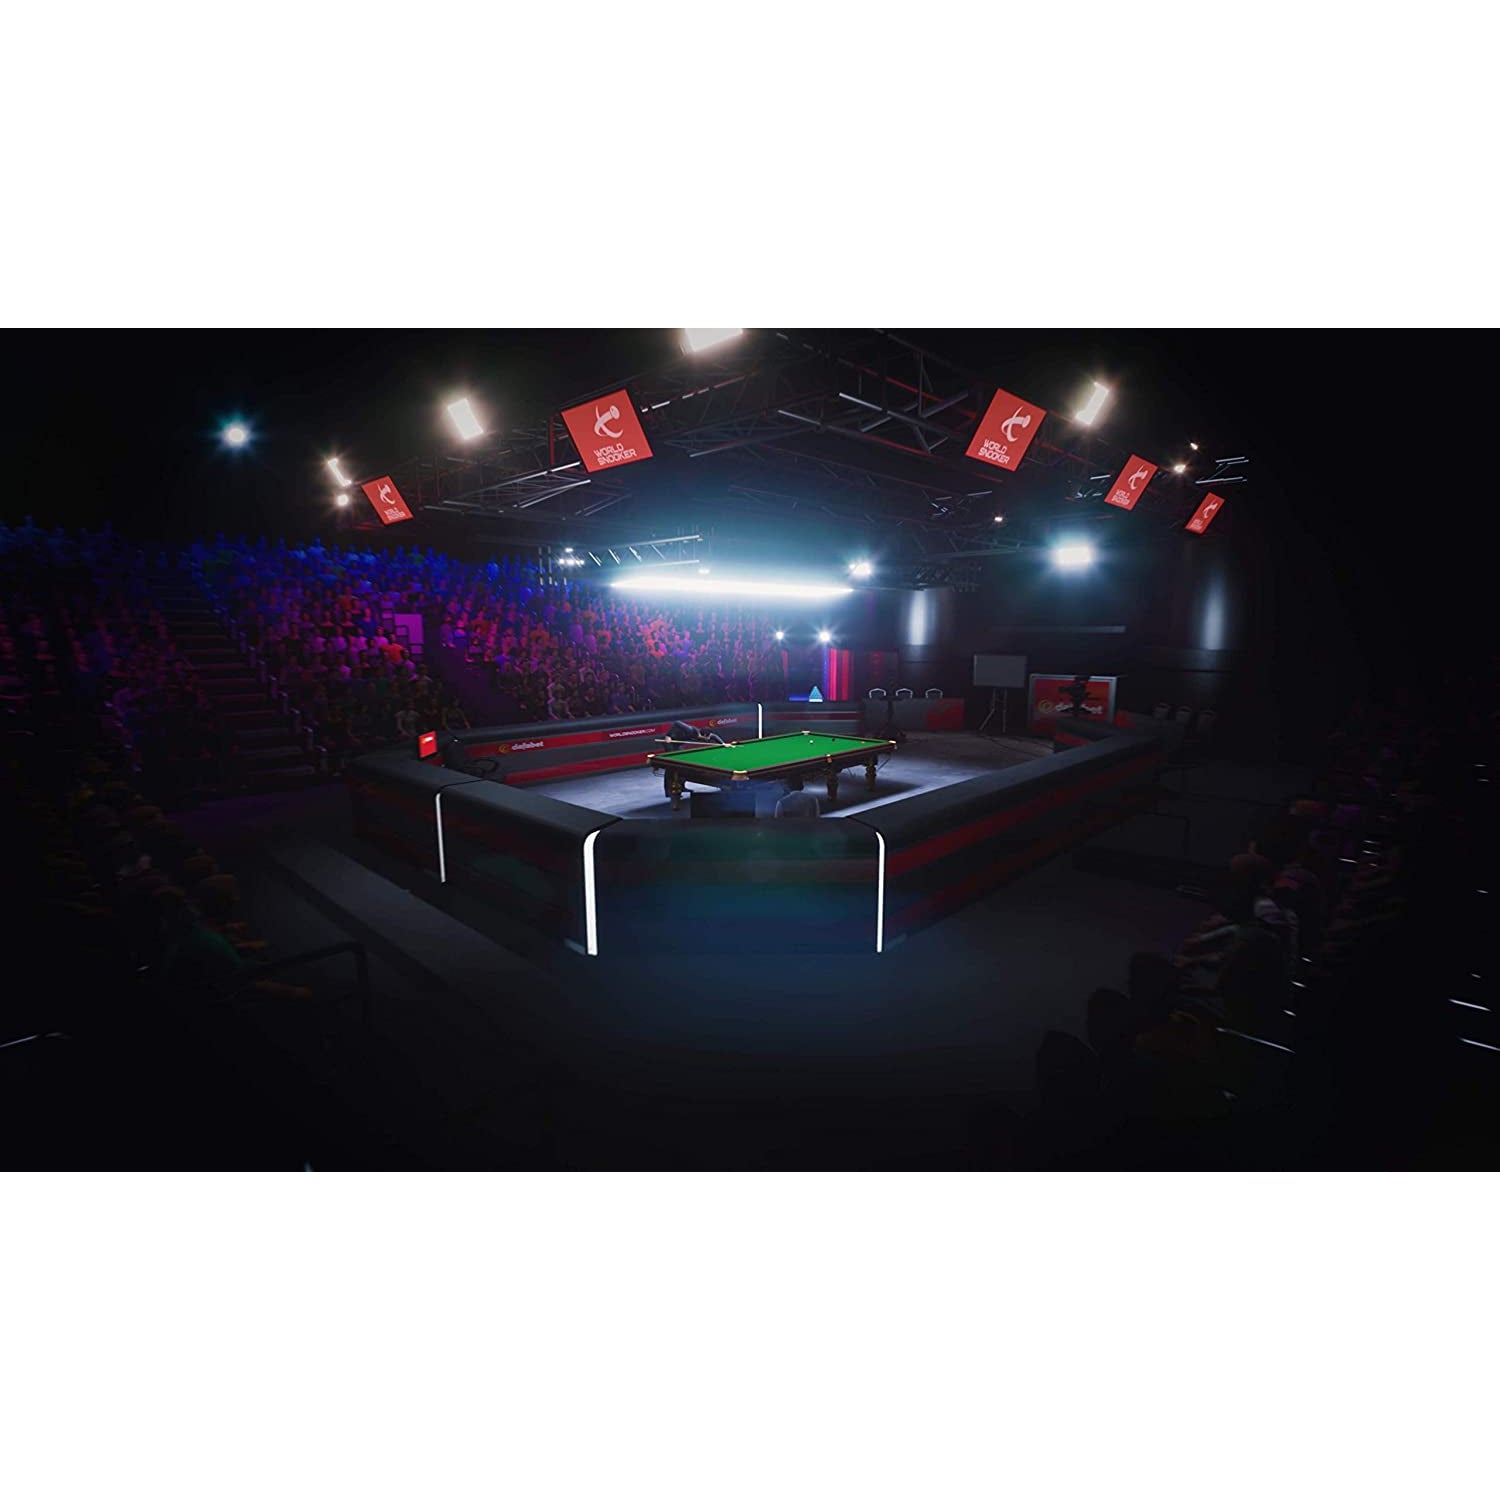 Snooker 19 - The Official Video Game (Xbox One)